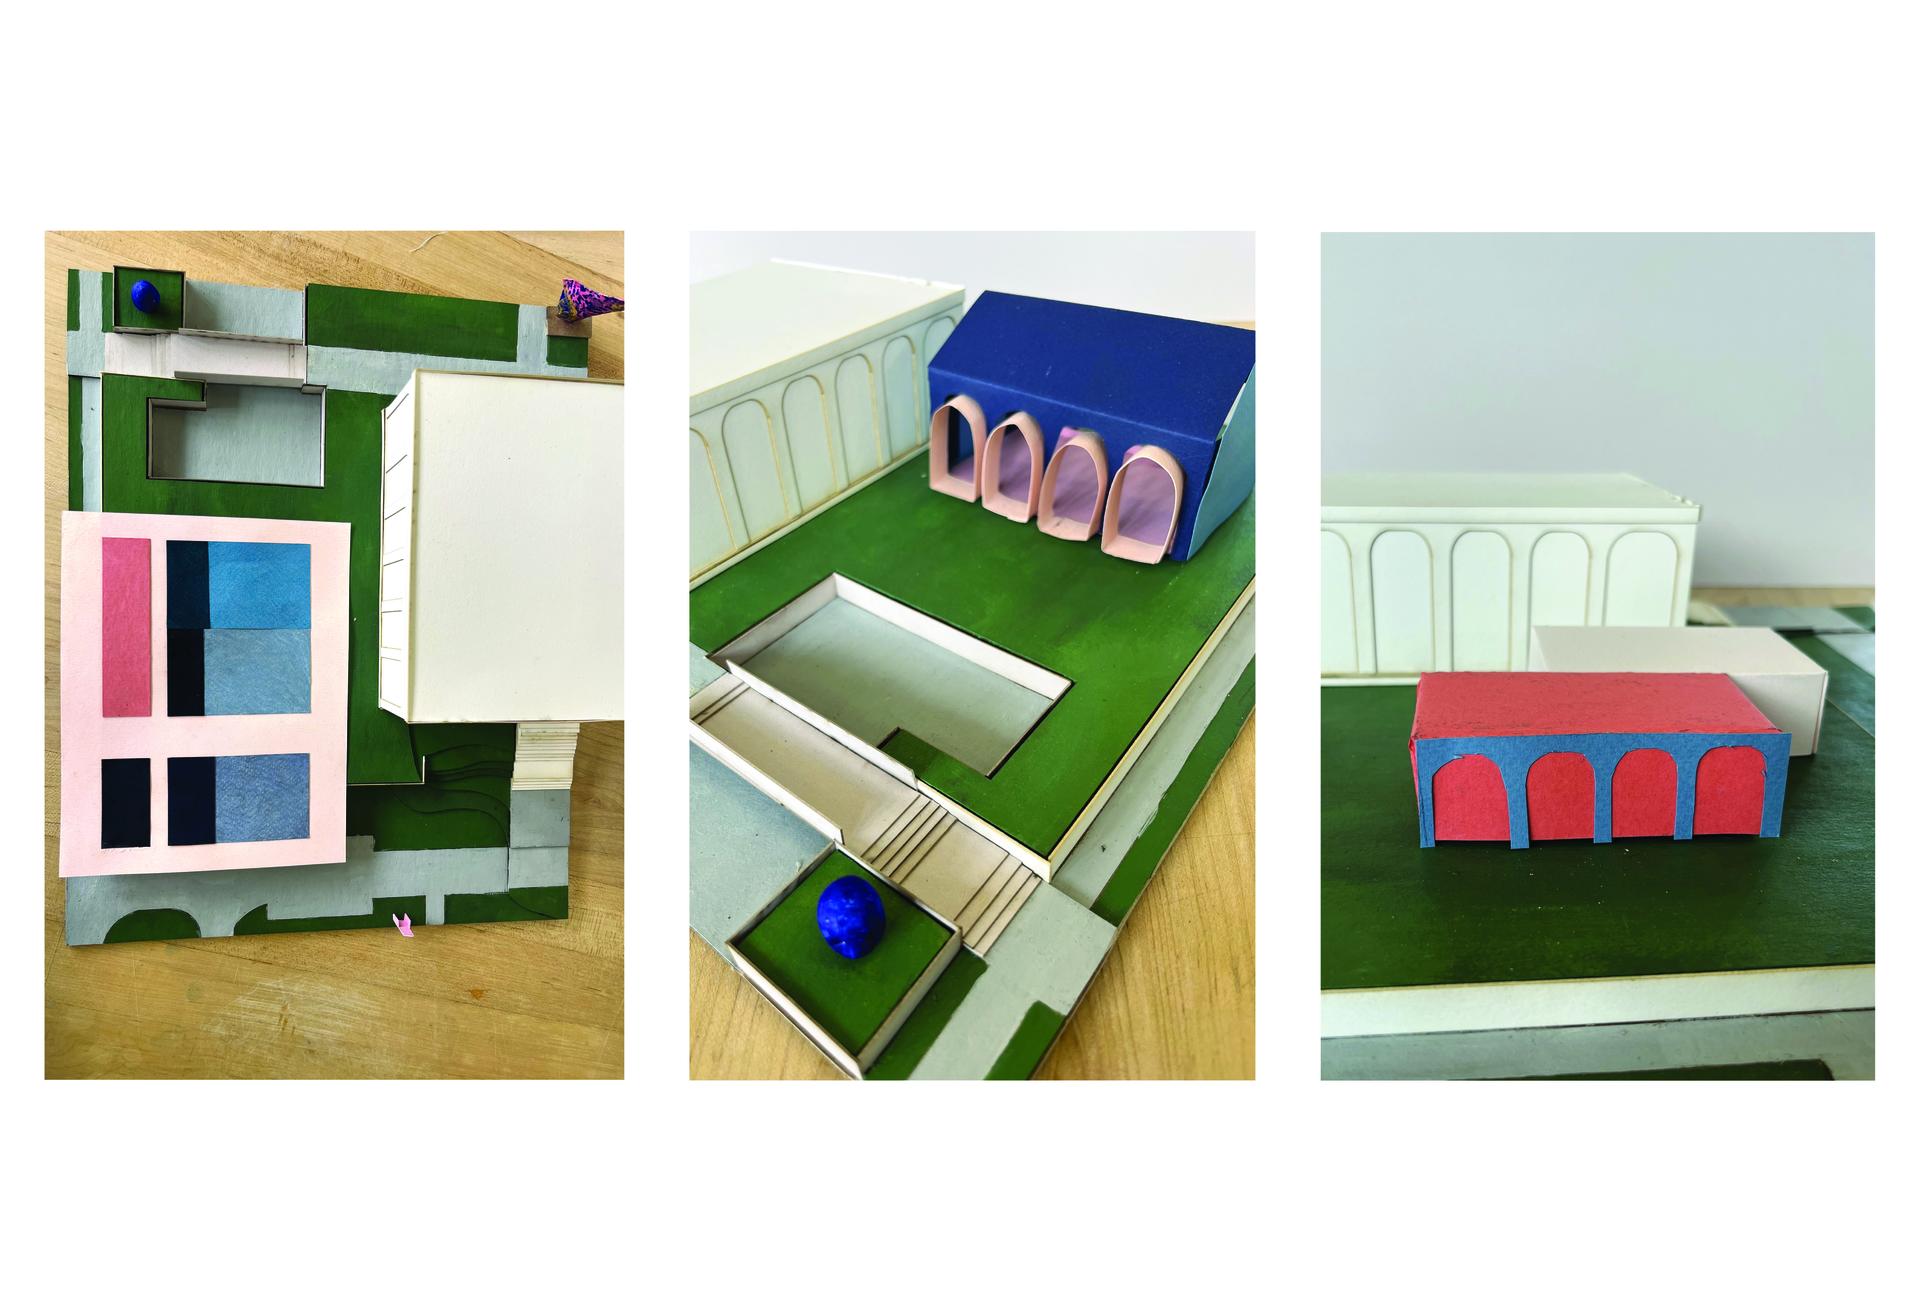 A model of the Sheldon Art Museum with colorful paper swatches and colorful sketch models of proposed addition.